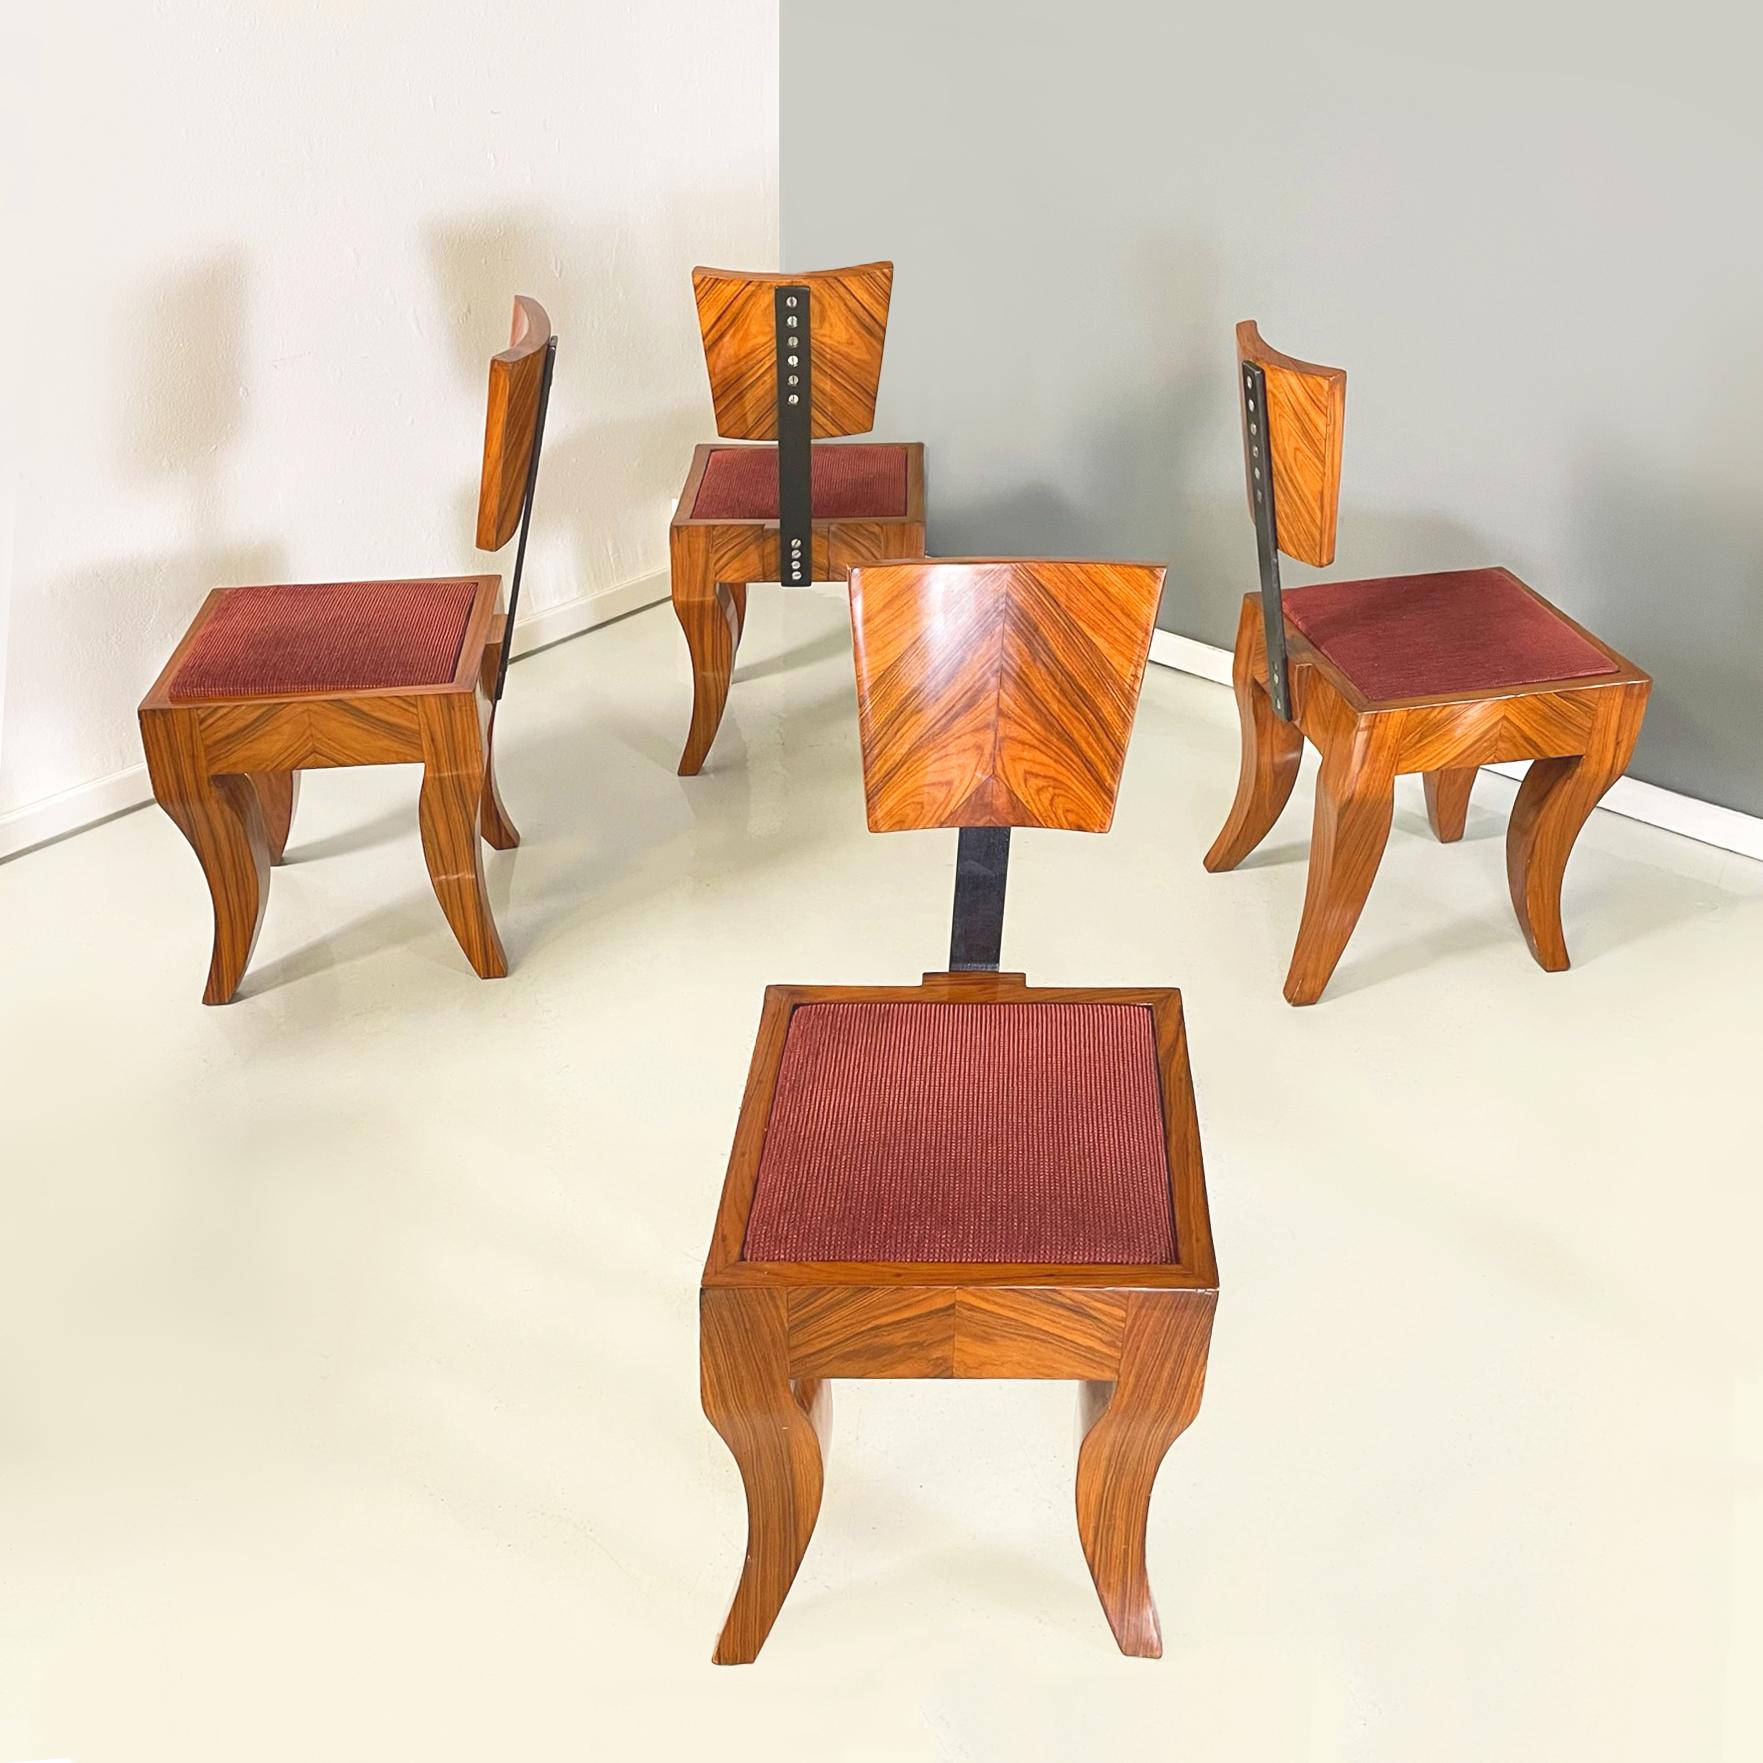 Italian Art Deco chairs in solid wood, black metal and red fabric, 1920-1930s
Set of 10 Art Deco dining chairs with polished solid wood structure. The seat is composed of a lightly padded square cushion covered in red fabric, inserted into the